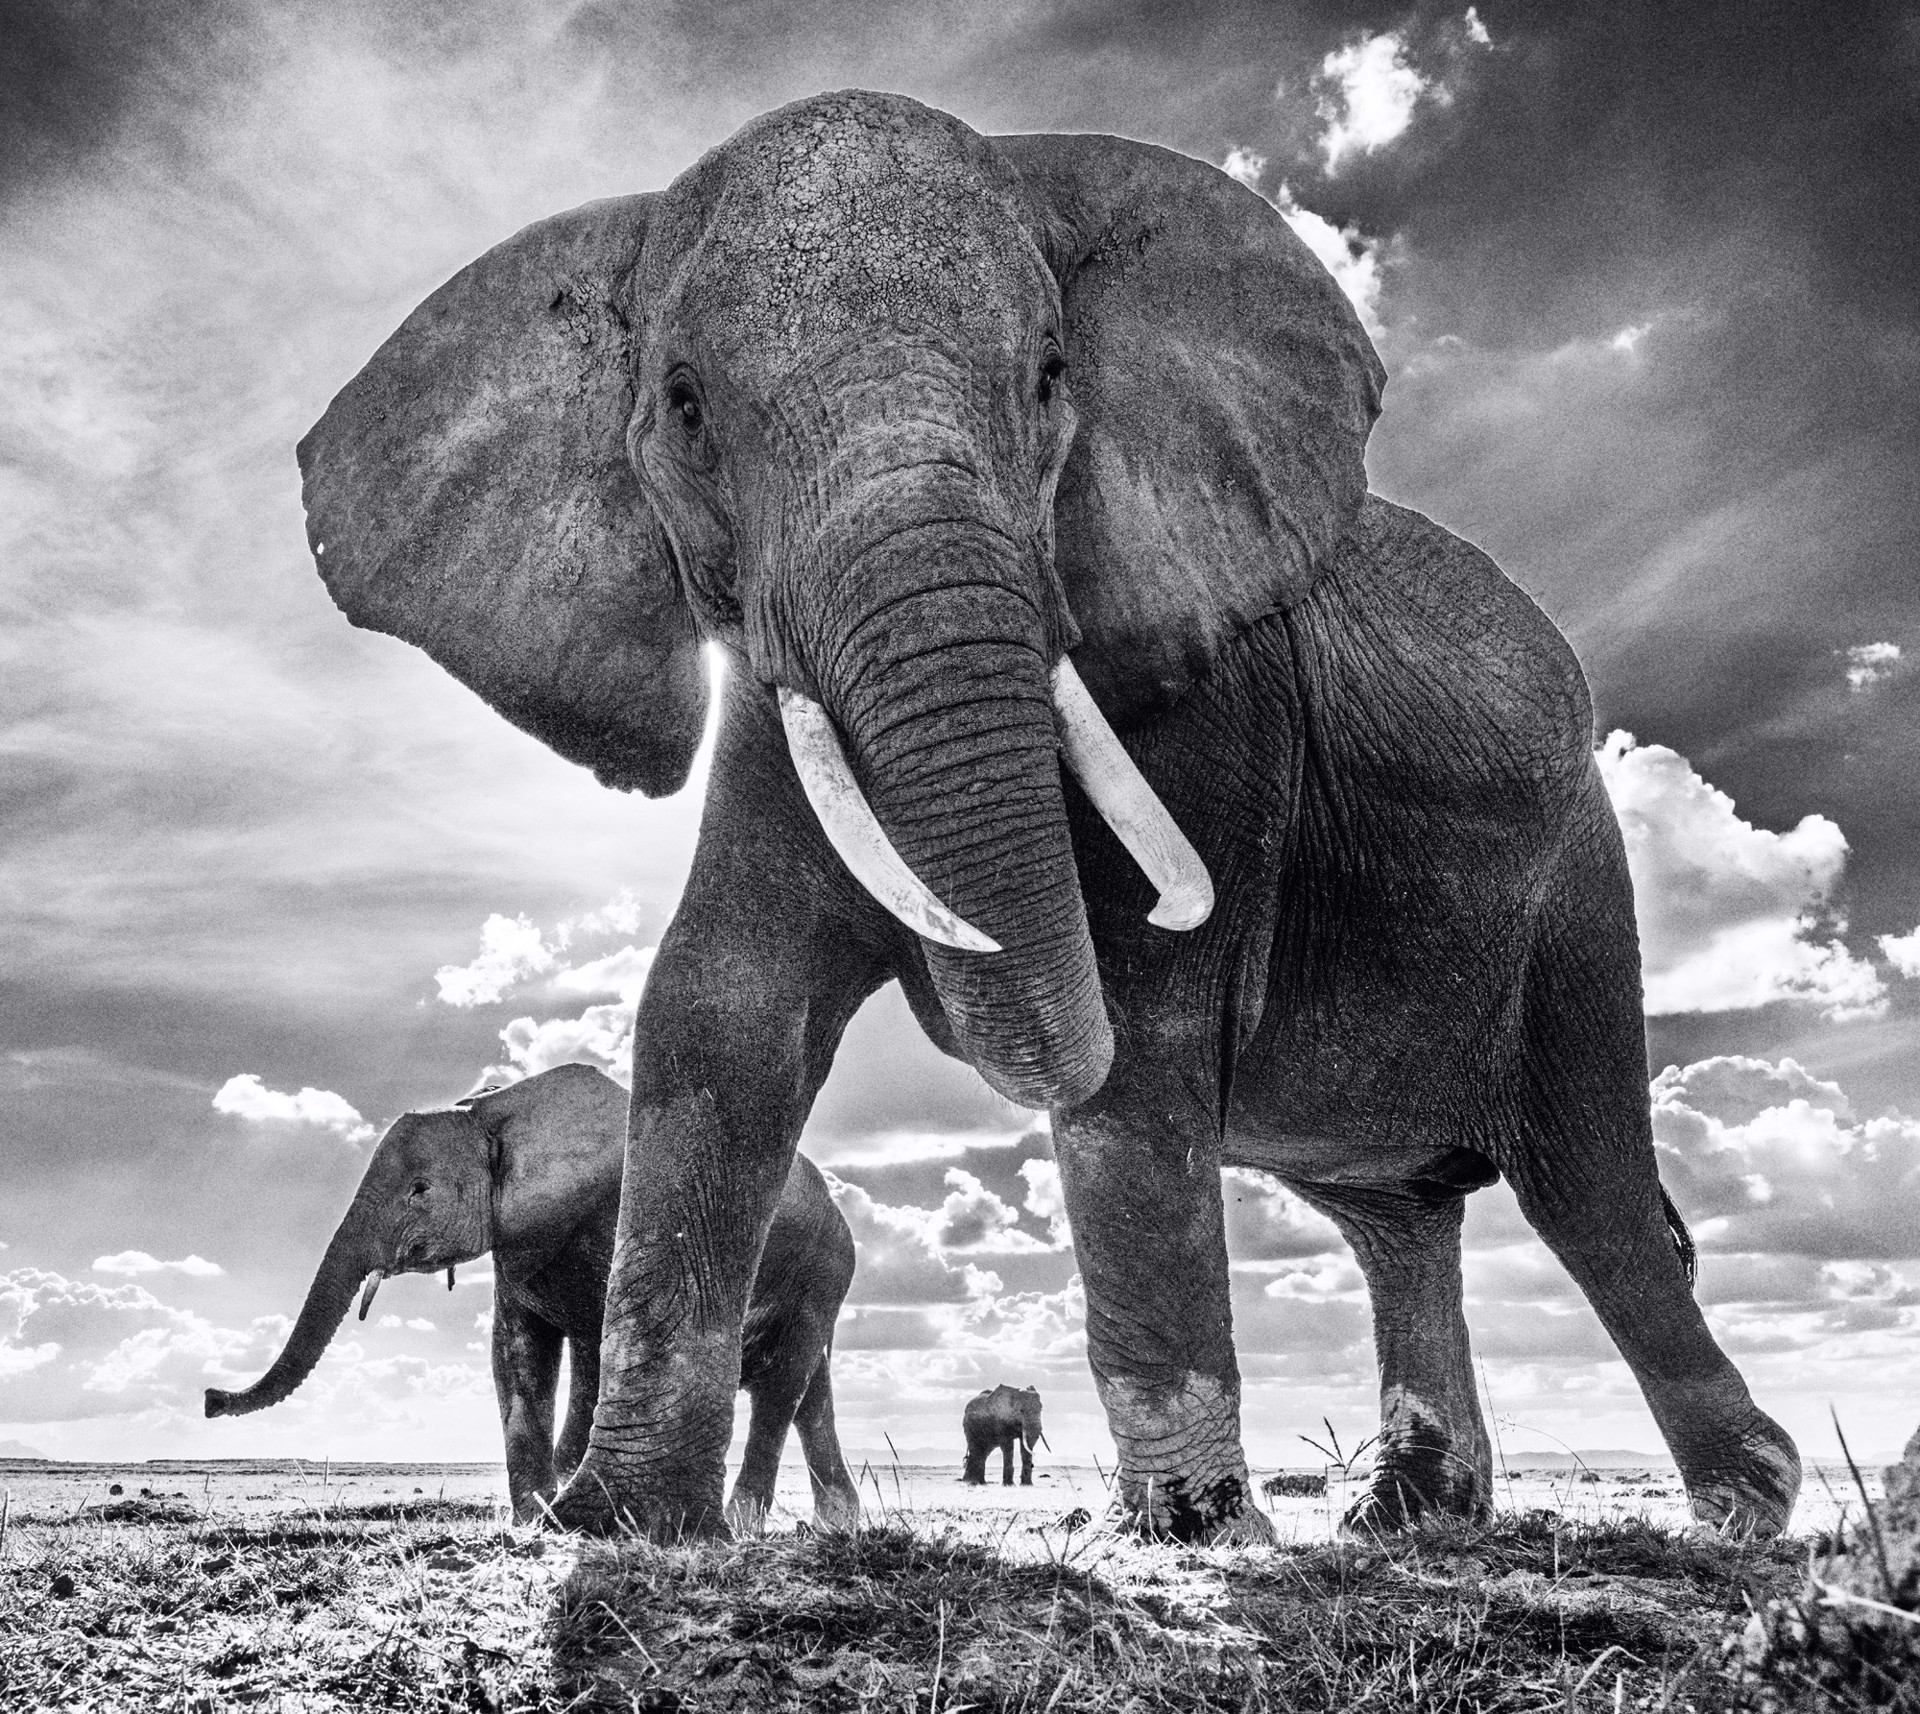 The Untouchables 2 by David Yarrow